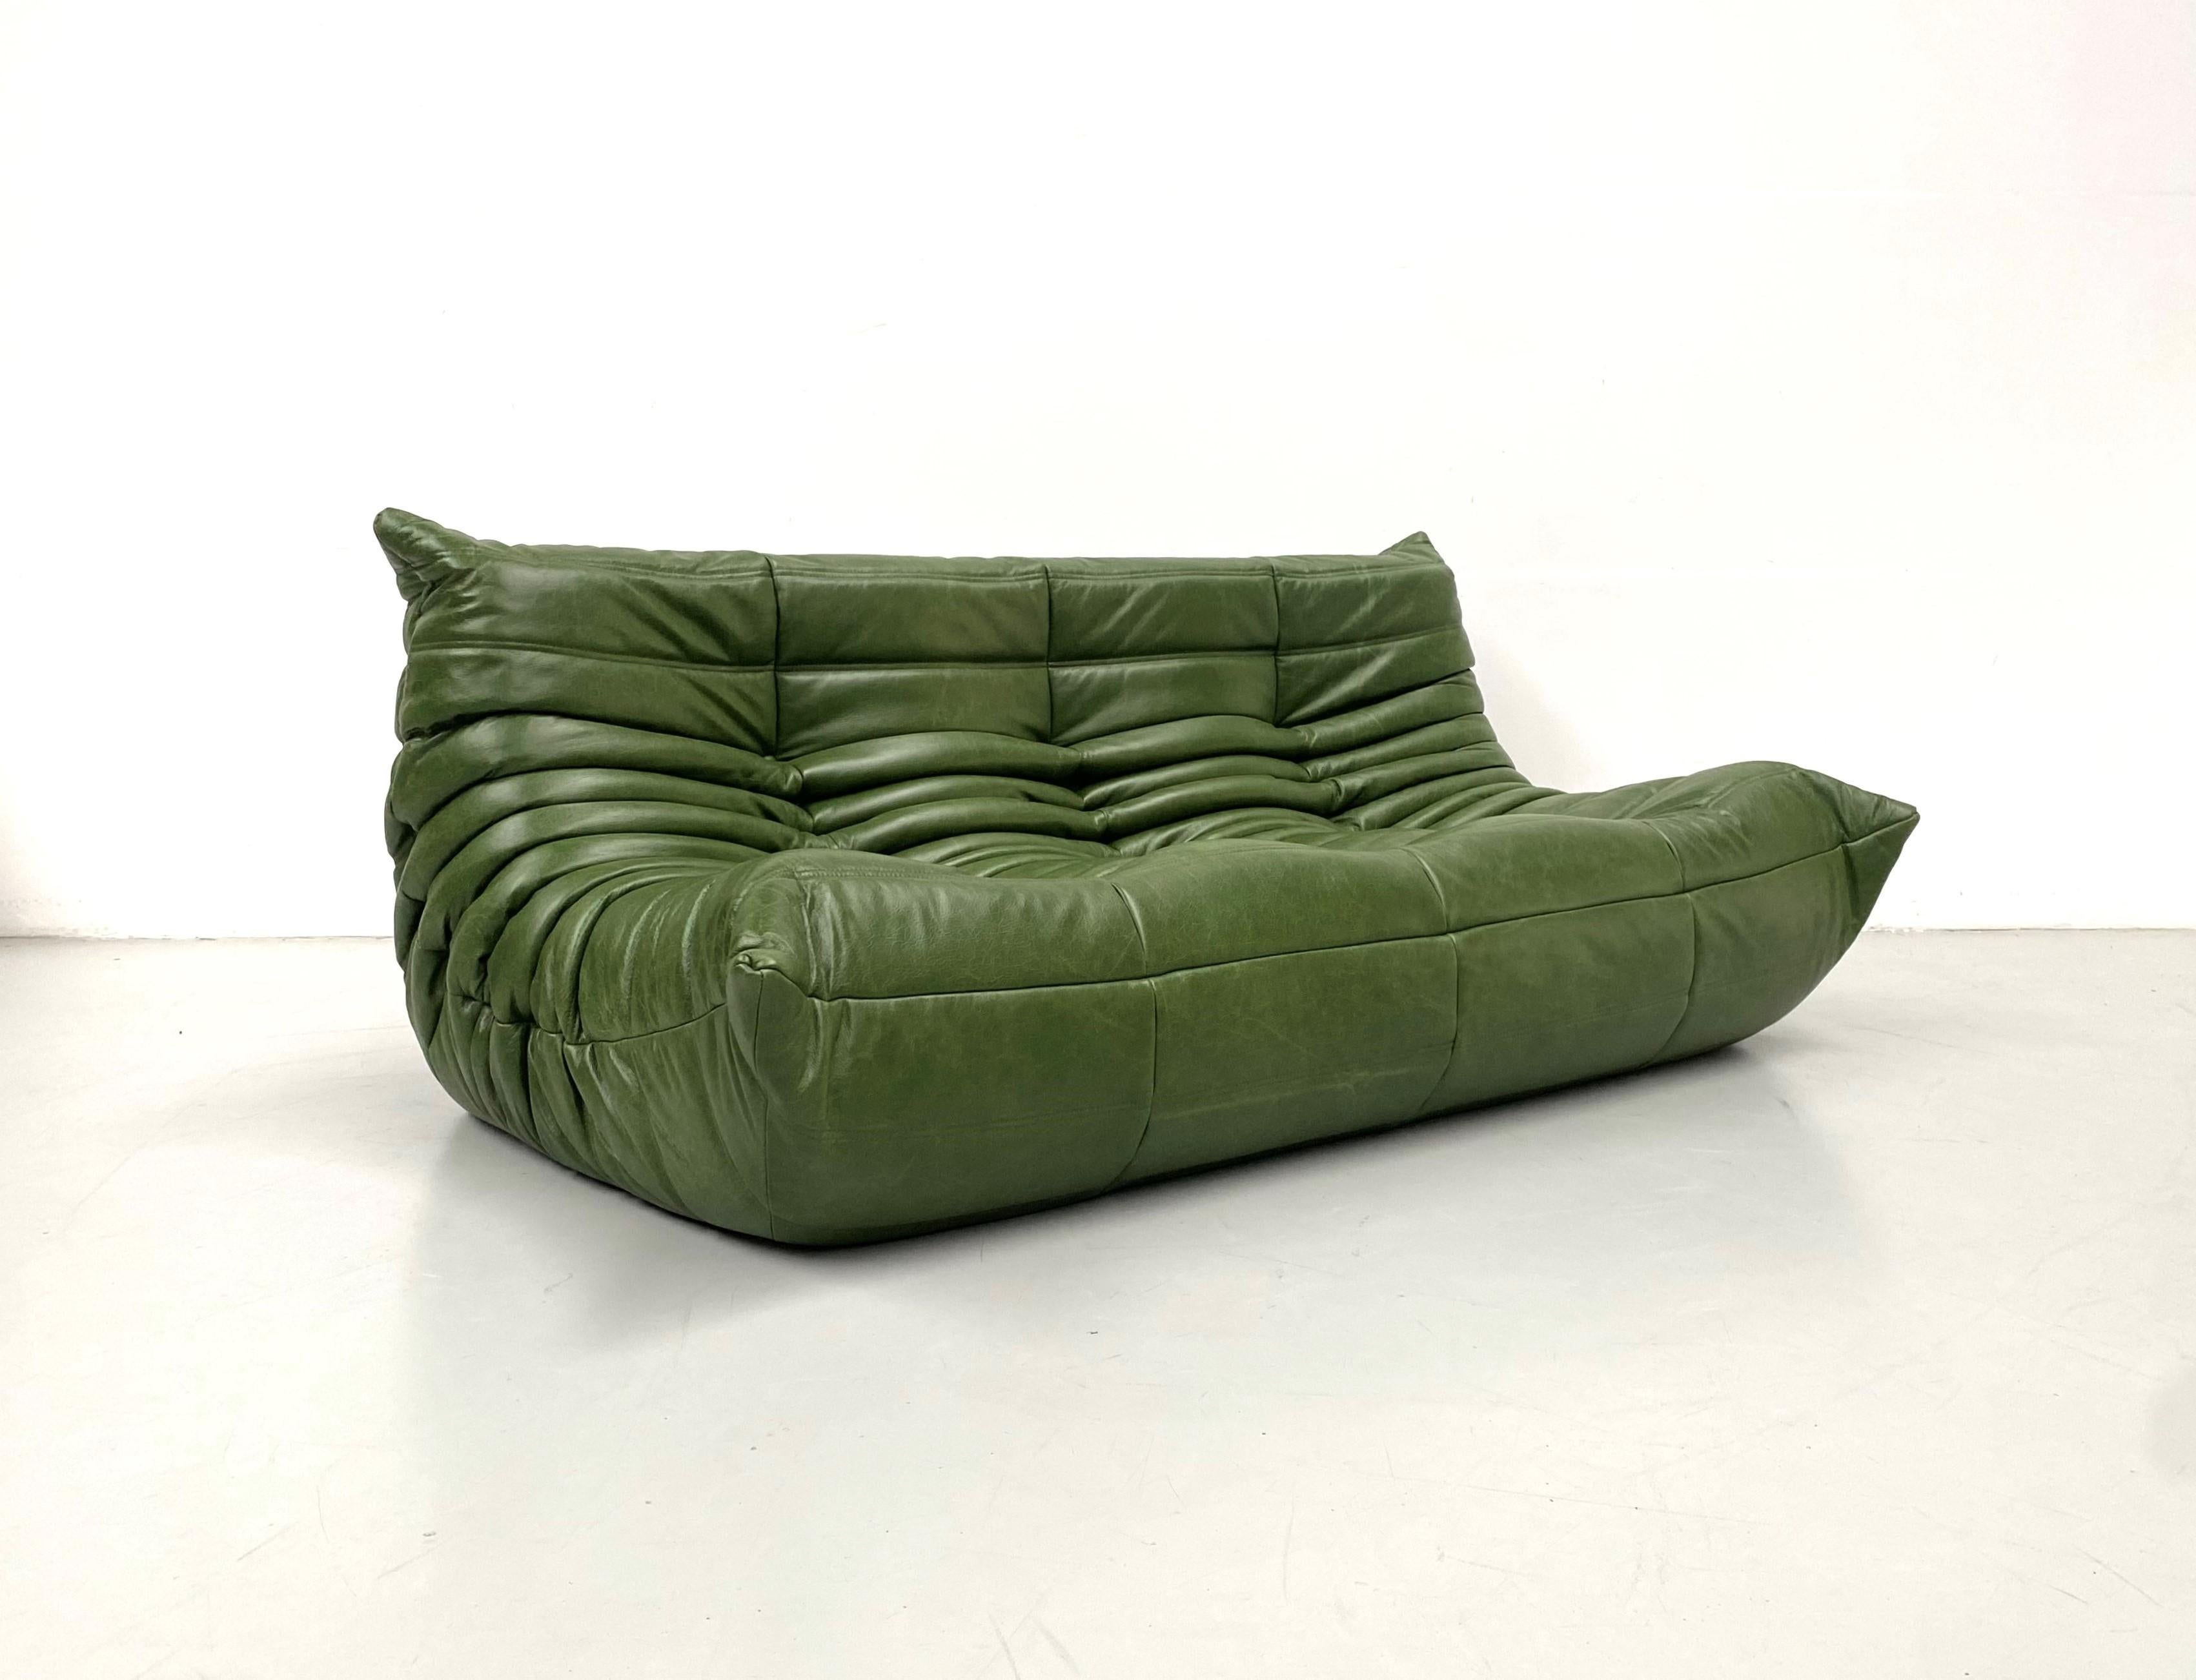 Mid-Century Modern Vintage French Togo Sofa in Green Leather by Michel Ducaroy for Ligne Roset